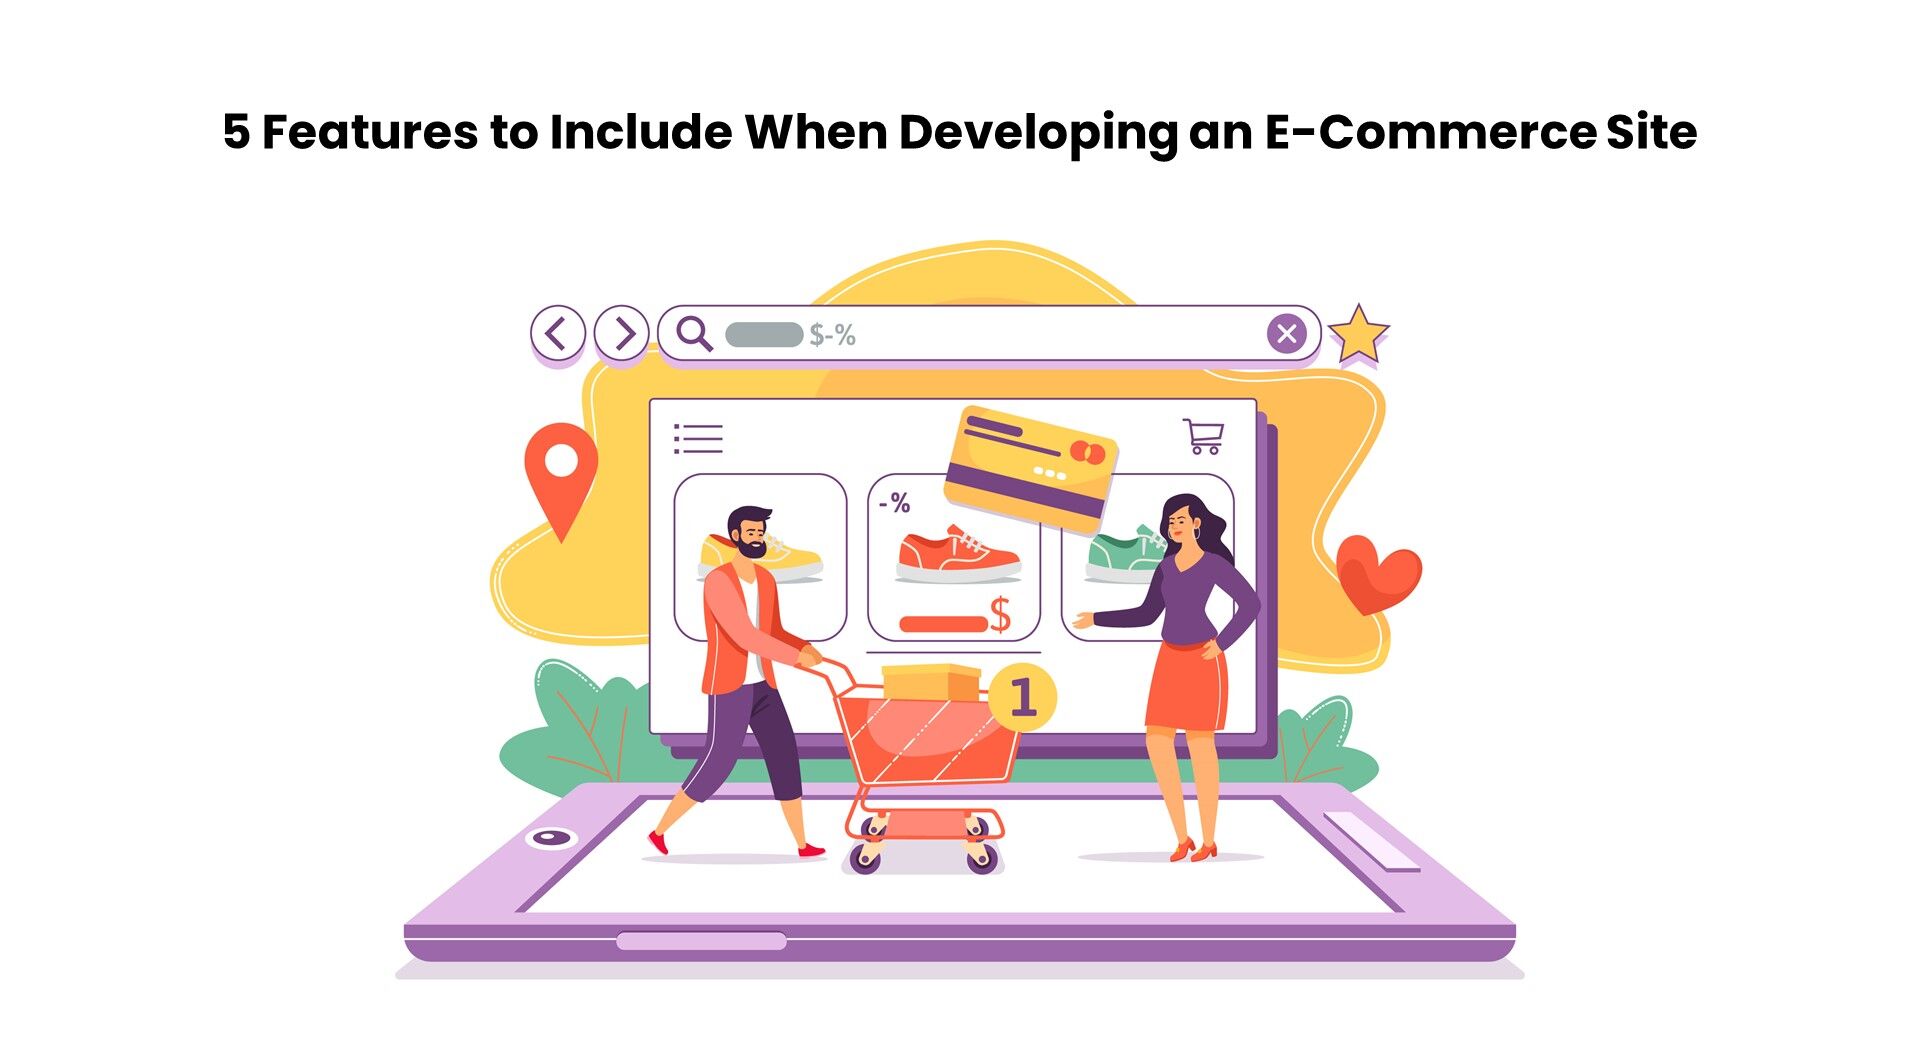 5 Features When Developing an E-Commerce Site